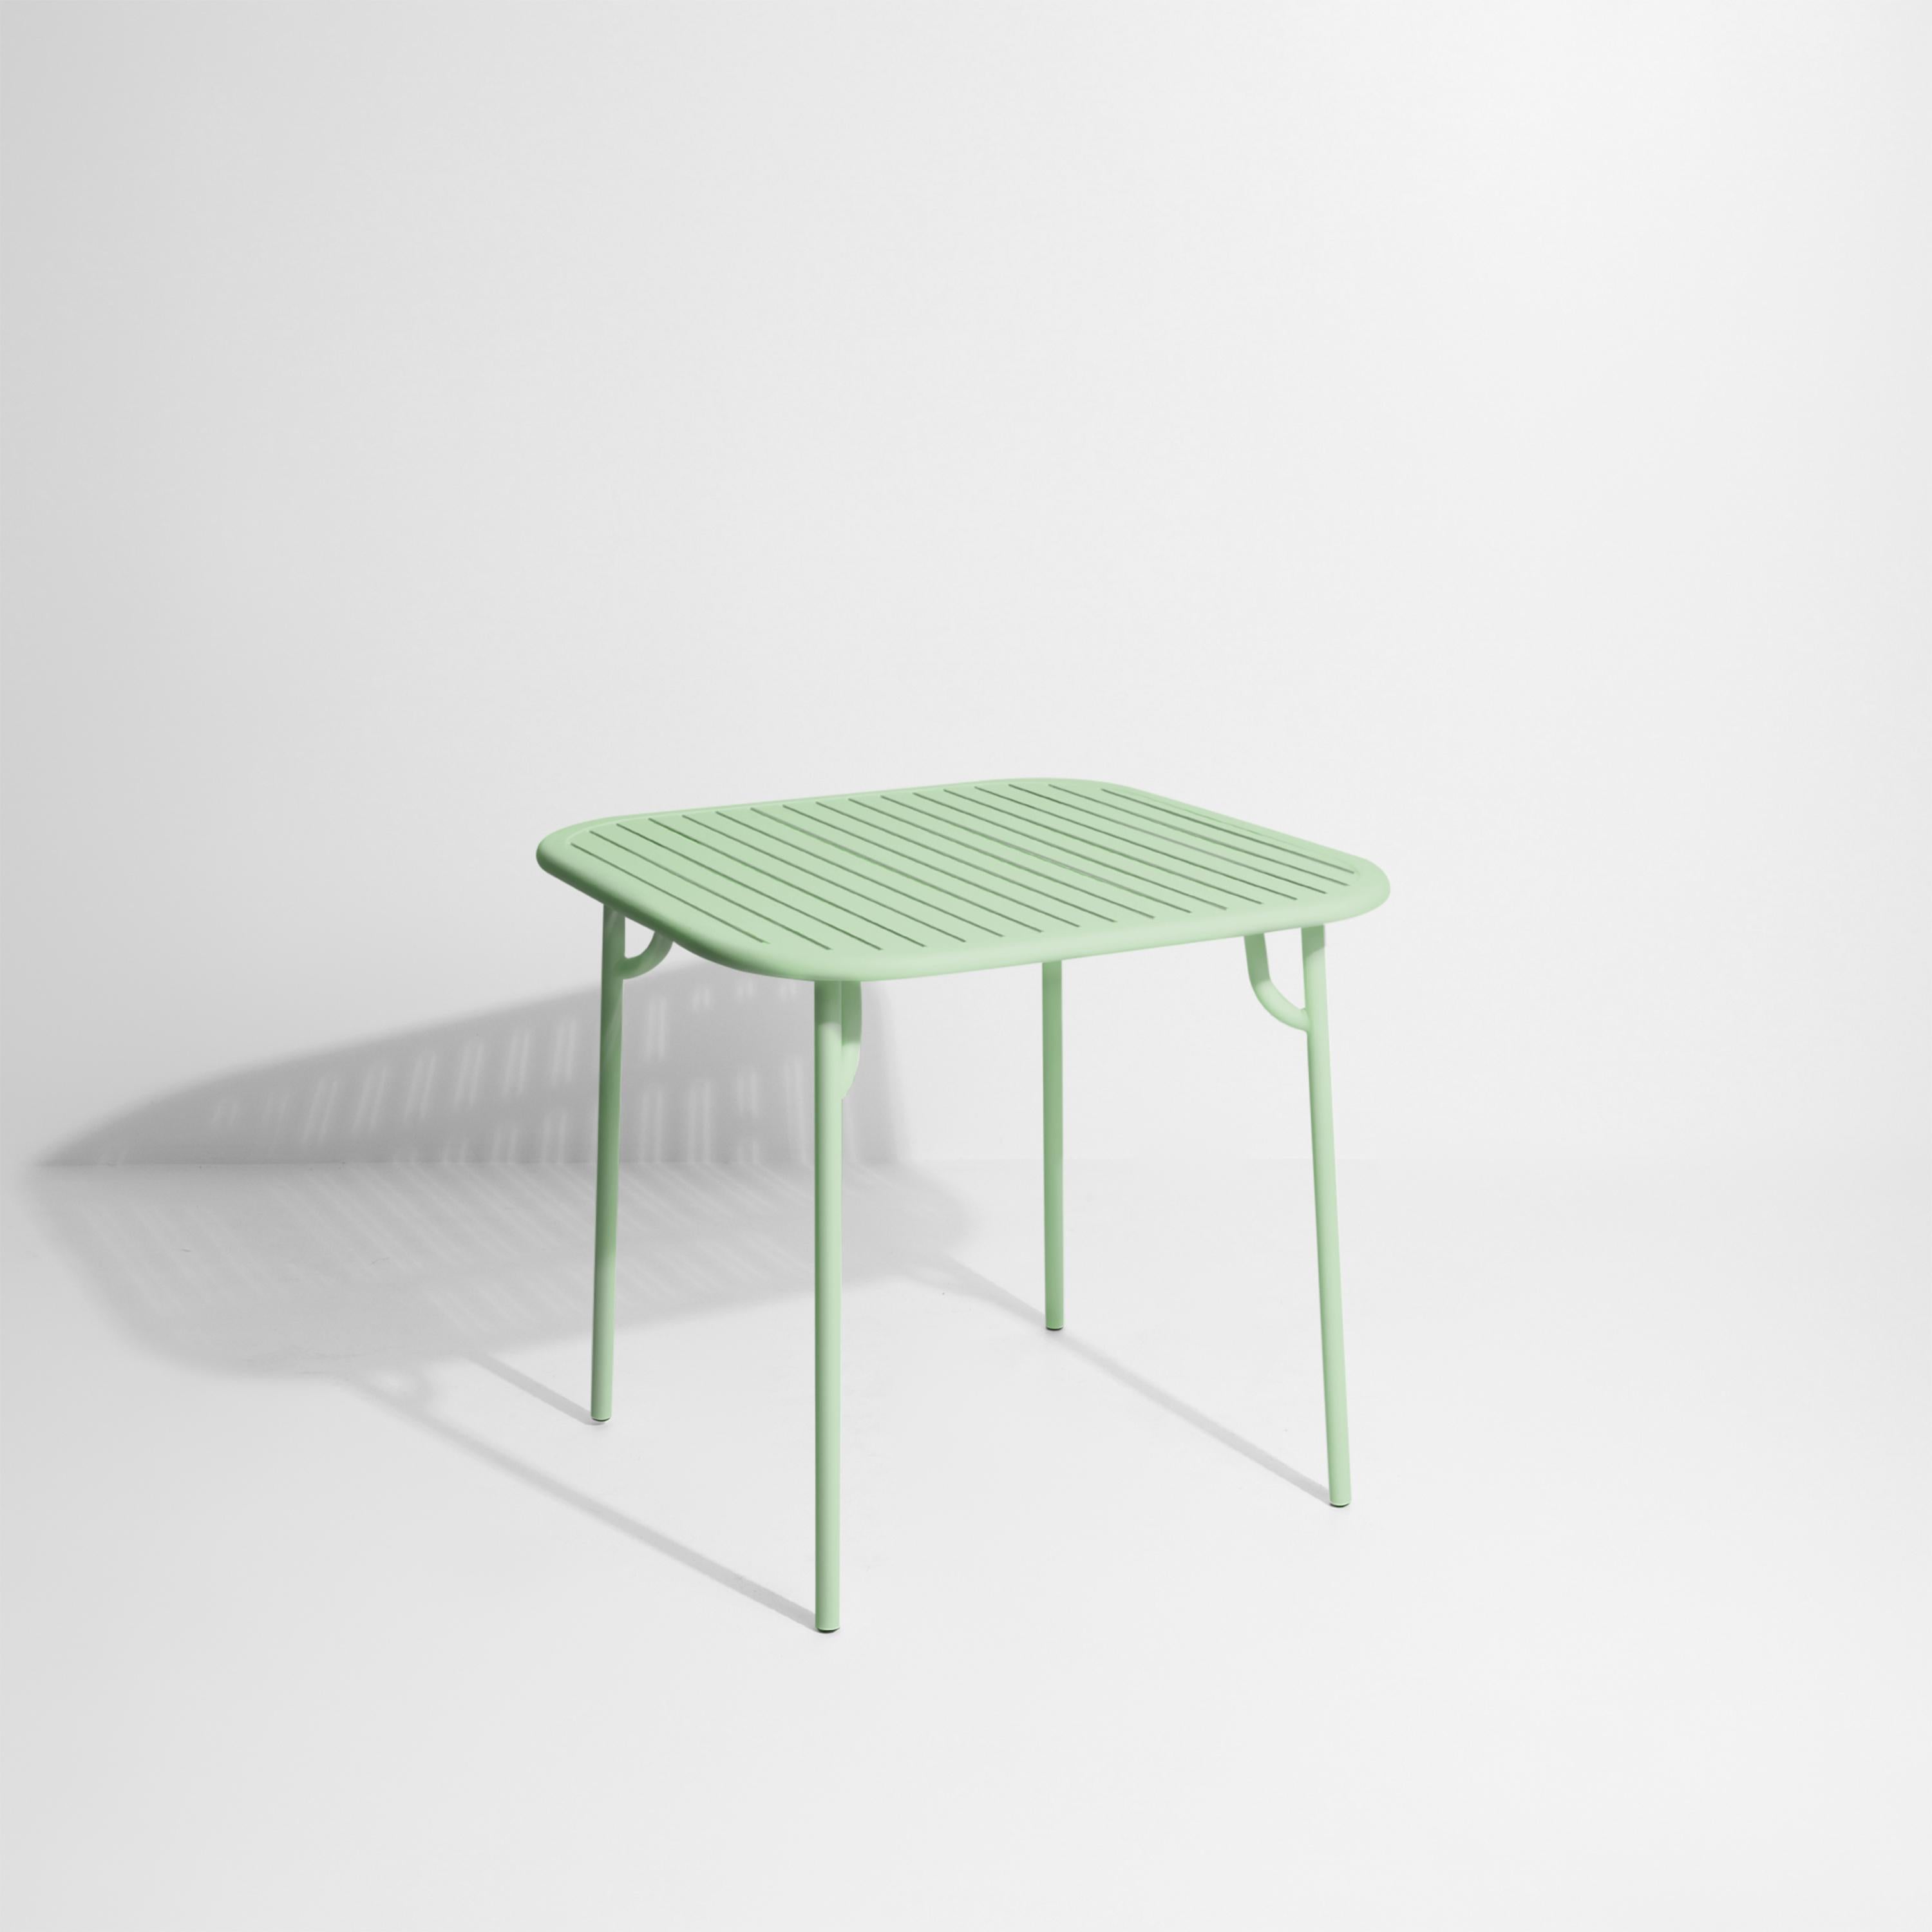 Petite Friture Week-End Square Dining Table in Pastel Green Aluminium with Slats by Studio BrichetZiegler, 2017

The week-end collection is a full range of outdoor furniture, in aluminium grained epoxy paint, matt finish, that includes 18